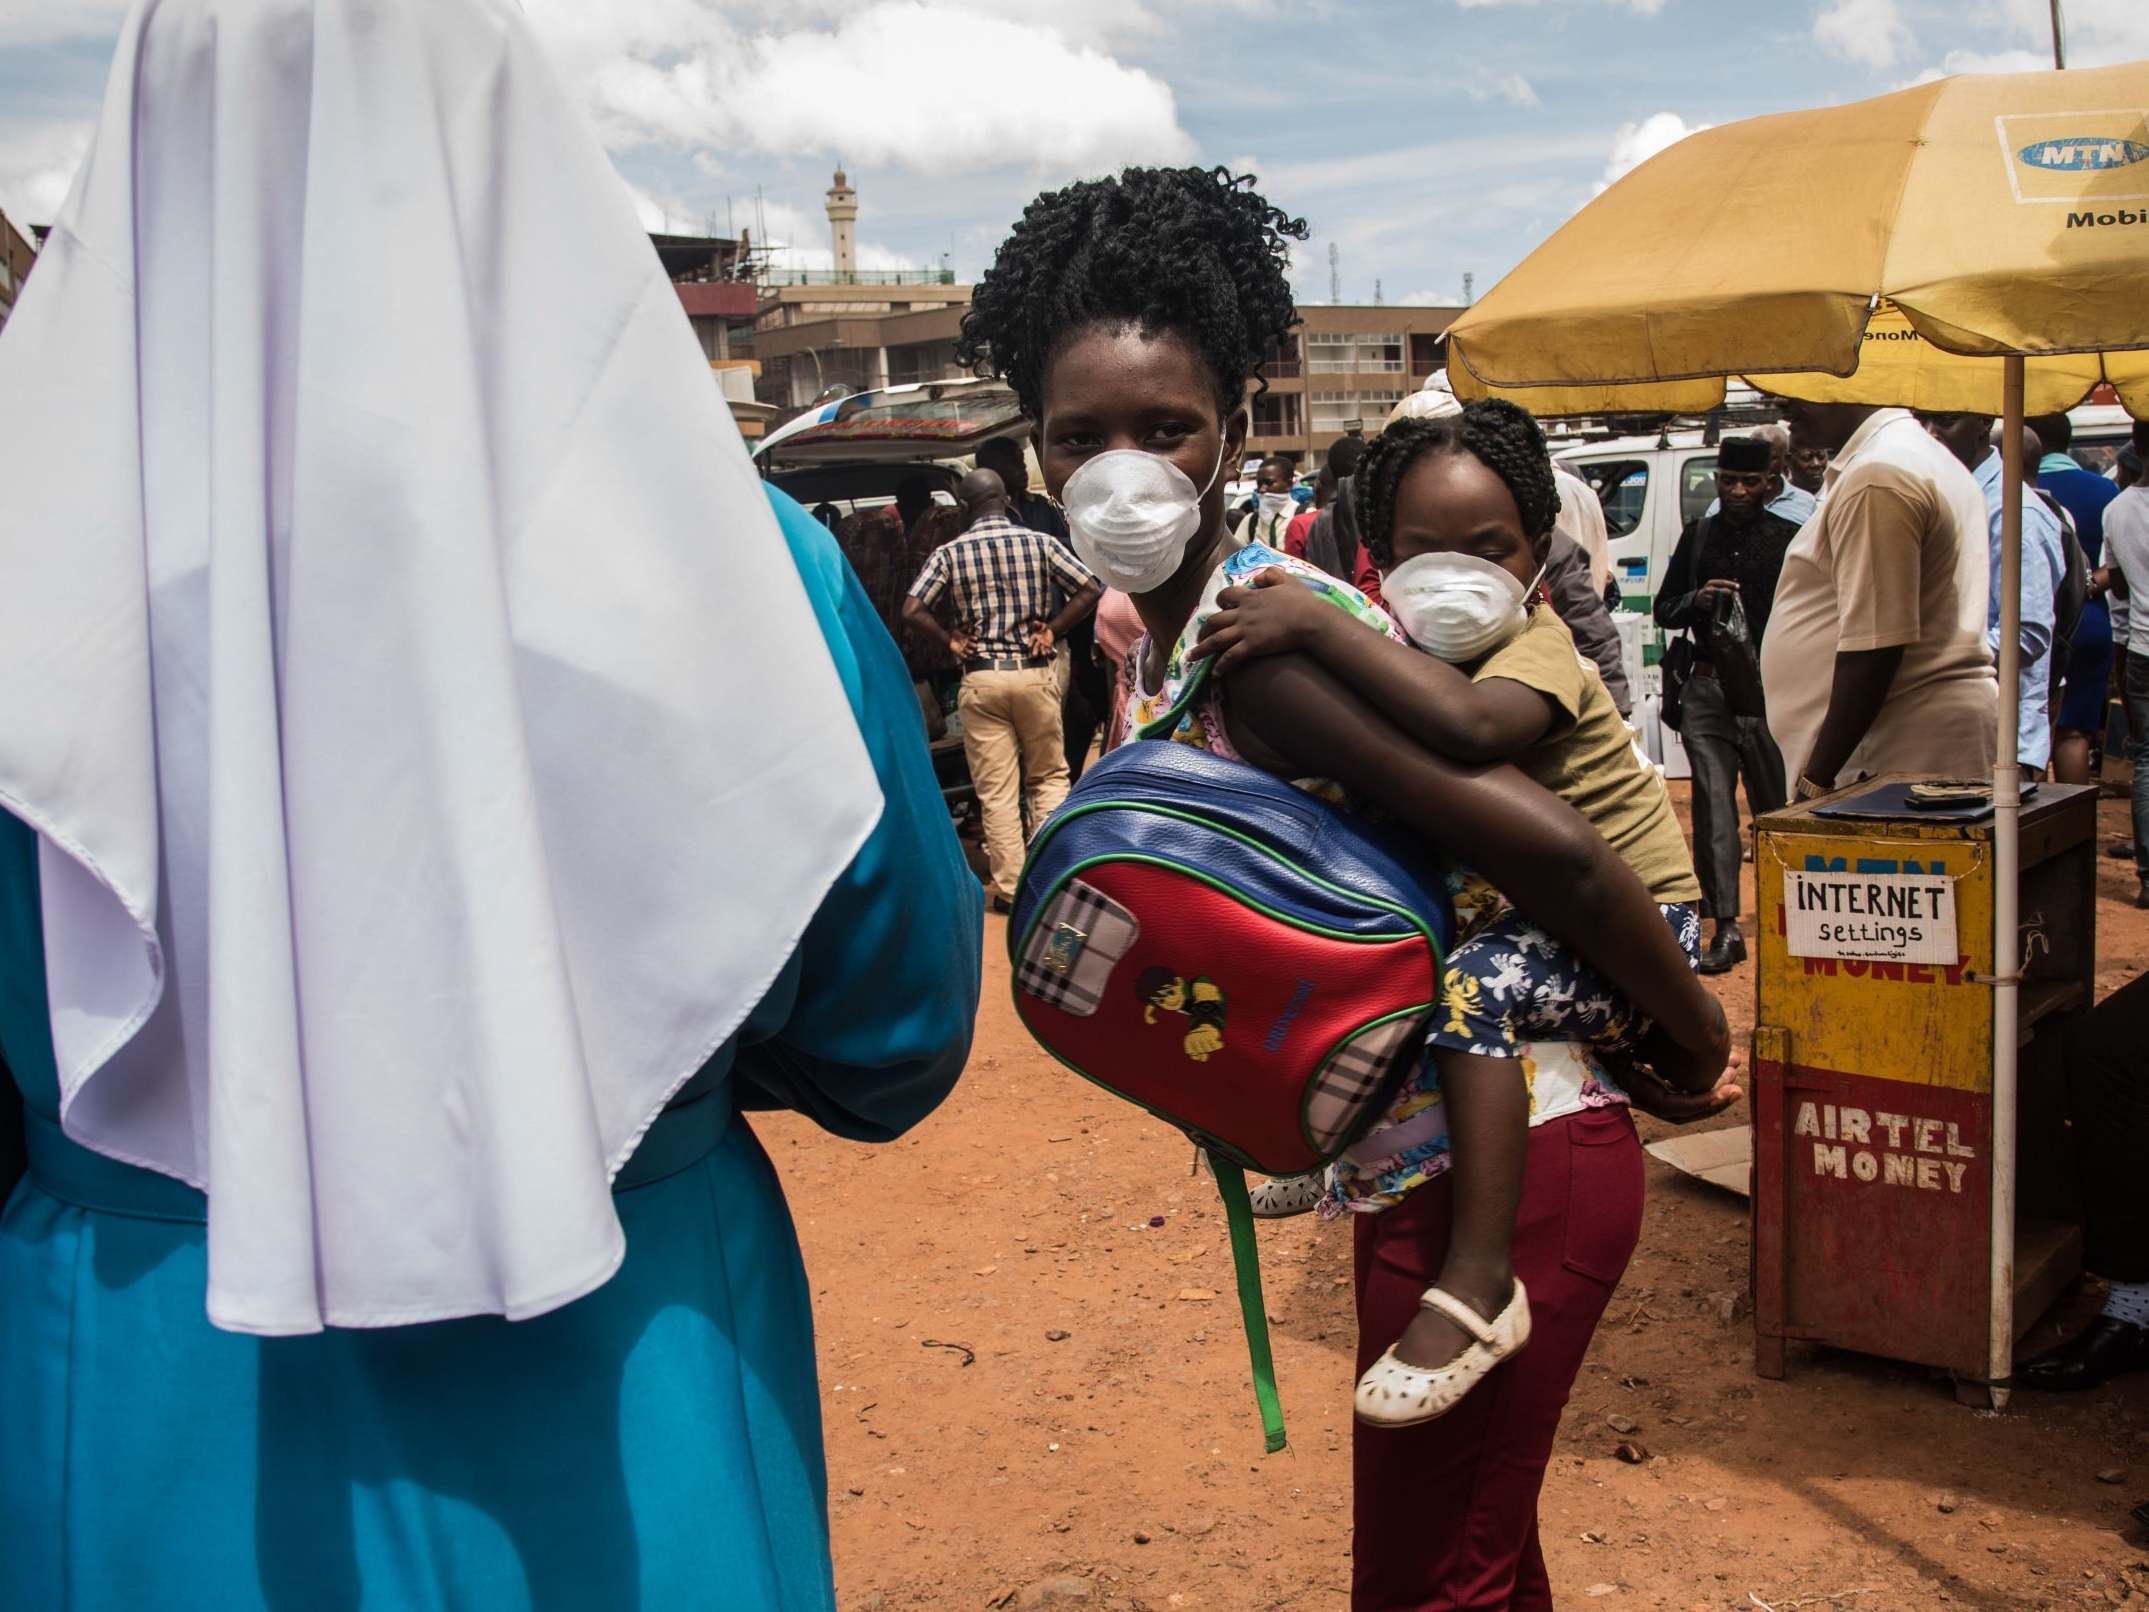 The greatest coronavirus challenge is yet to come — and it will affect us all